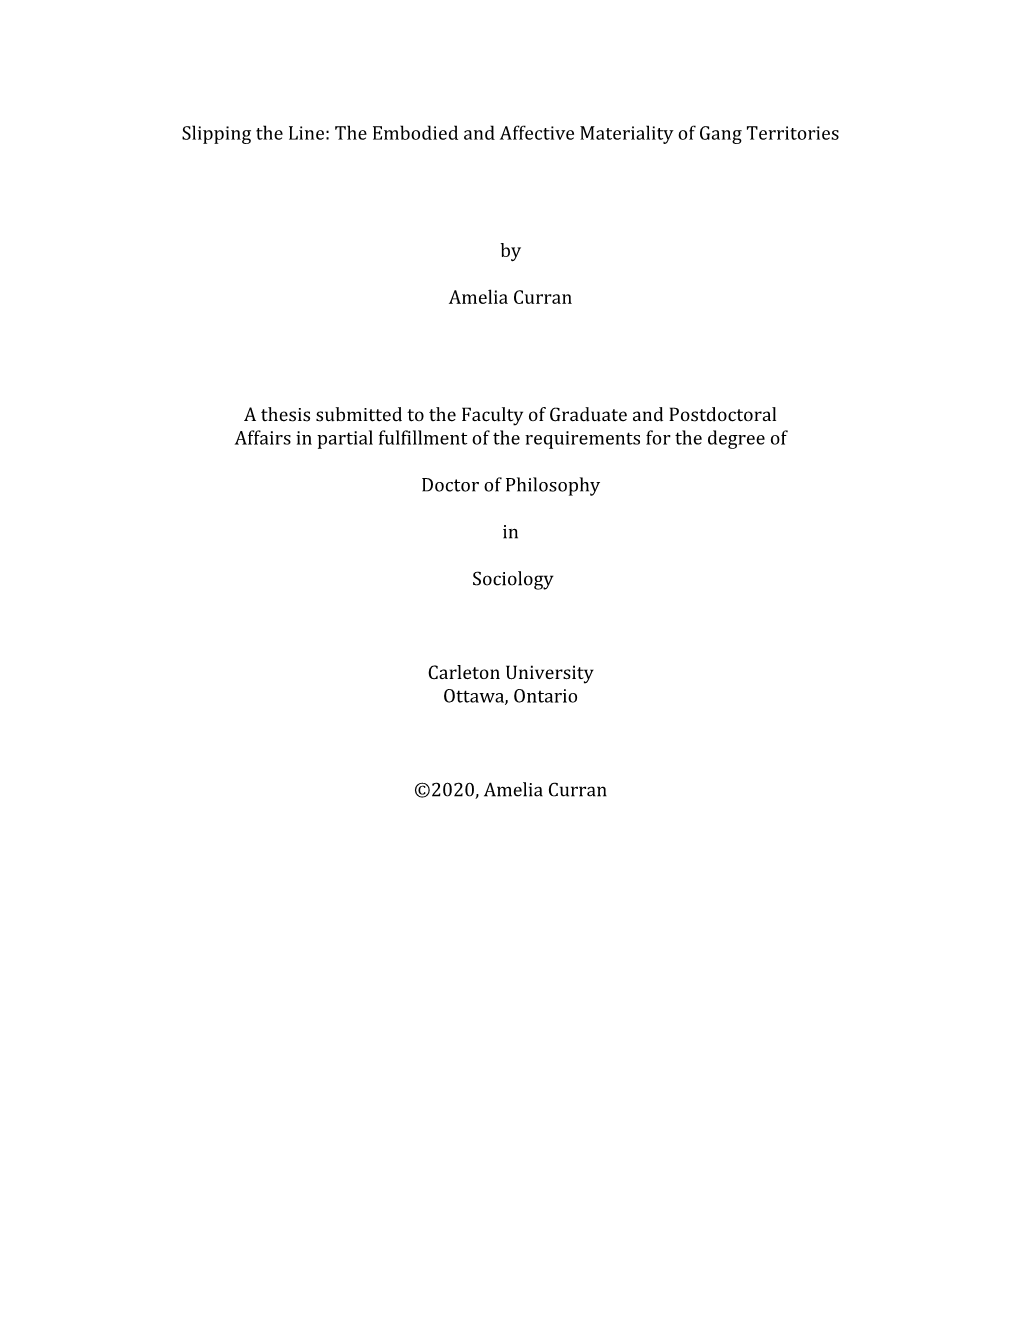 Slipping the Line: the Embodied and Affective Materiality of Gang Territories by Amelia Curran a Thesis Submitted to the Facult